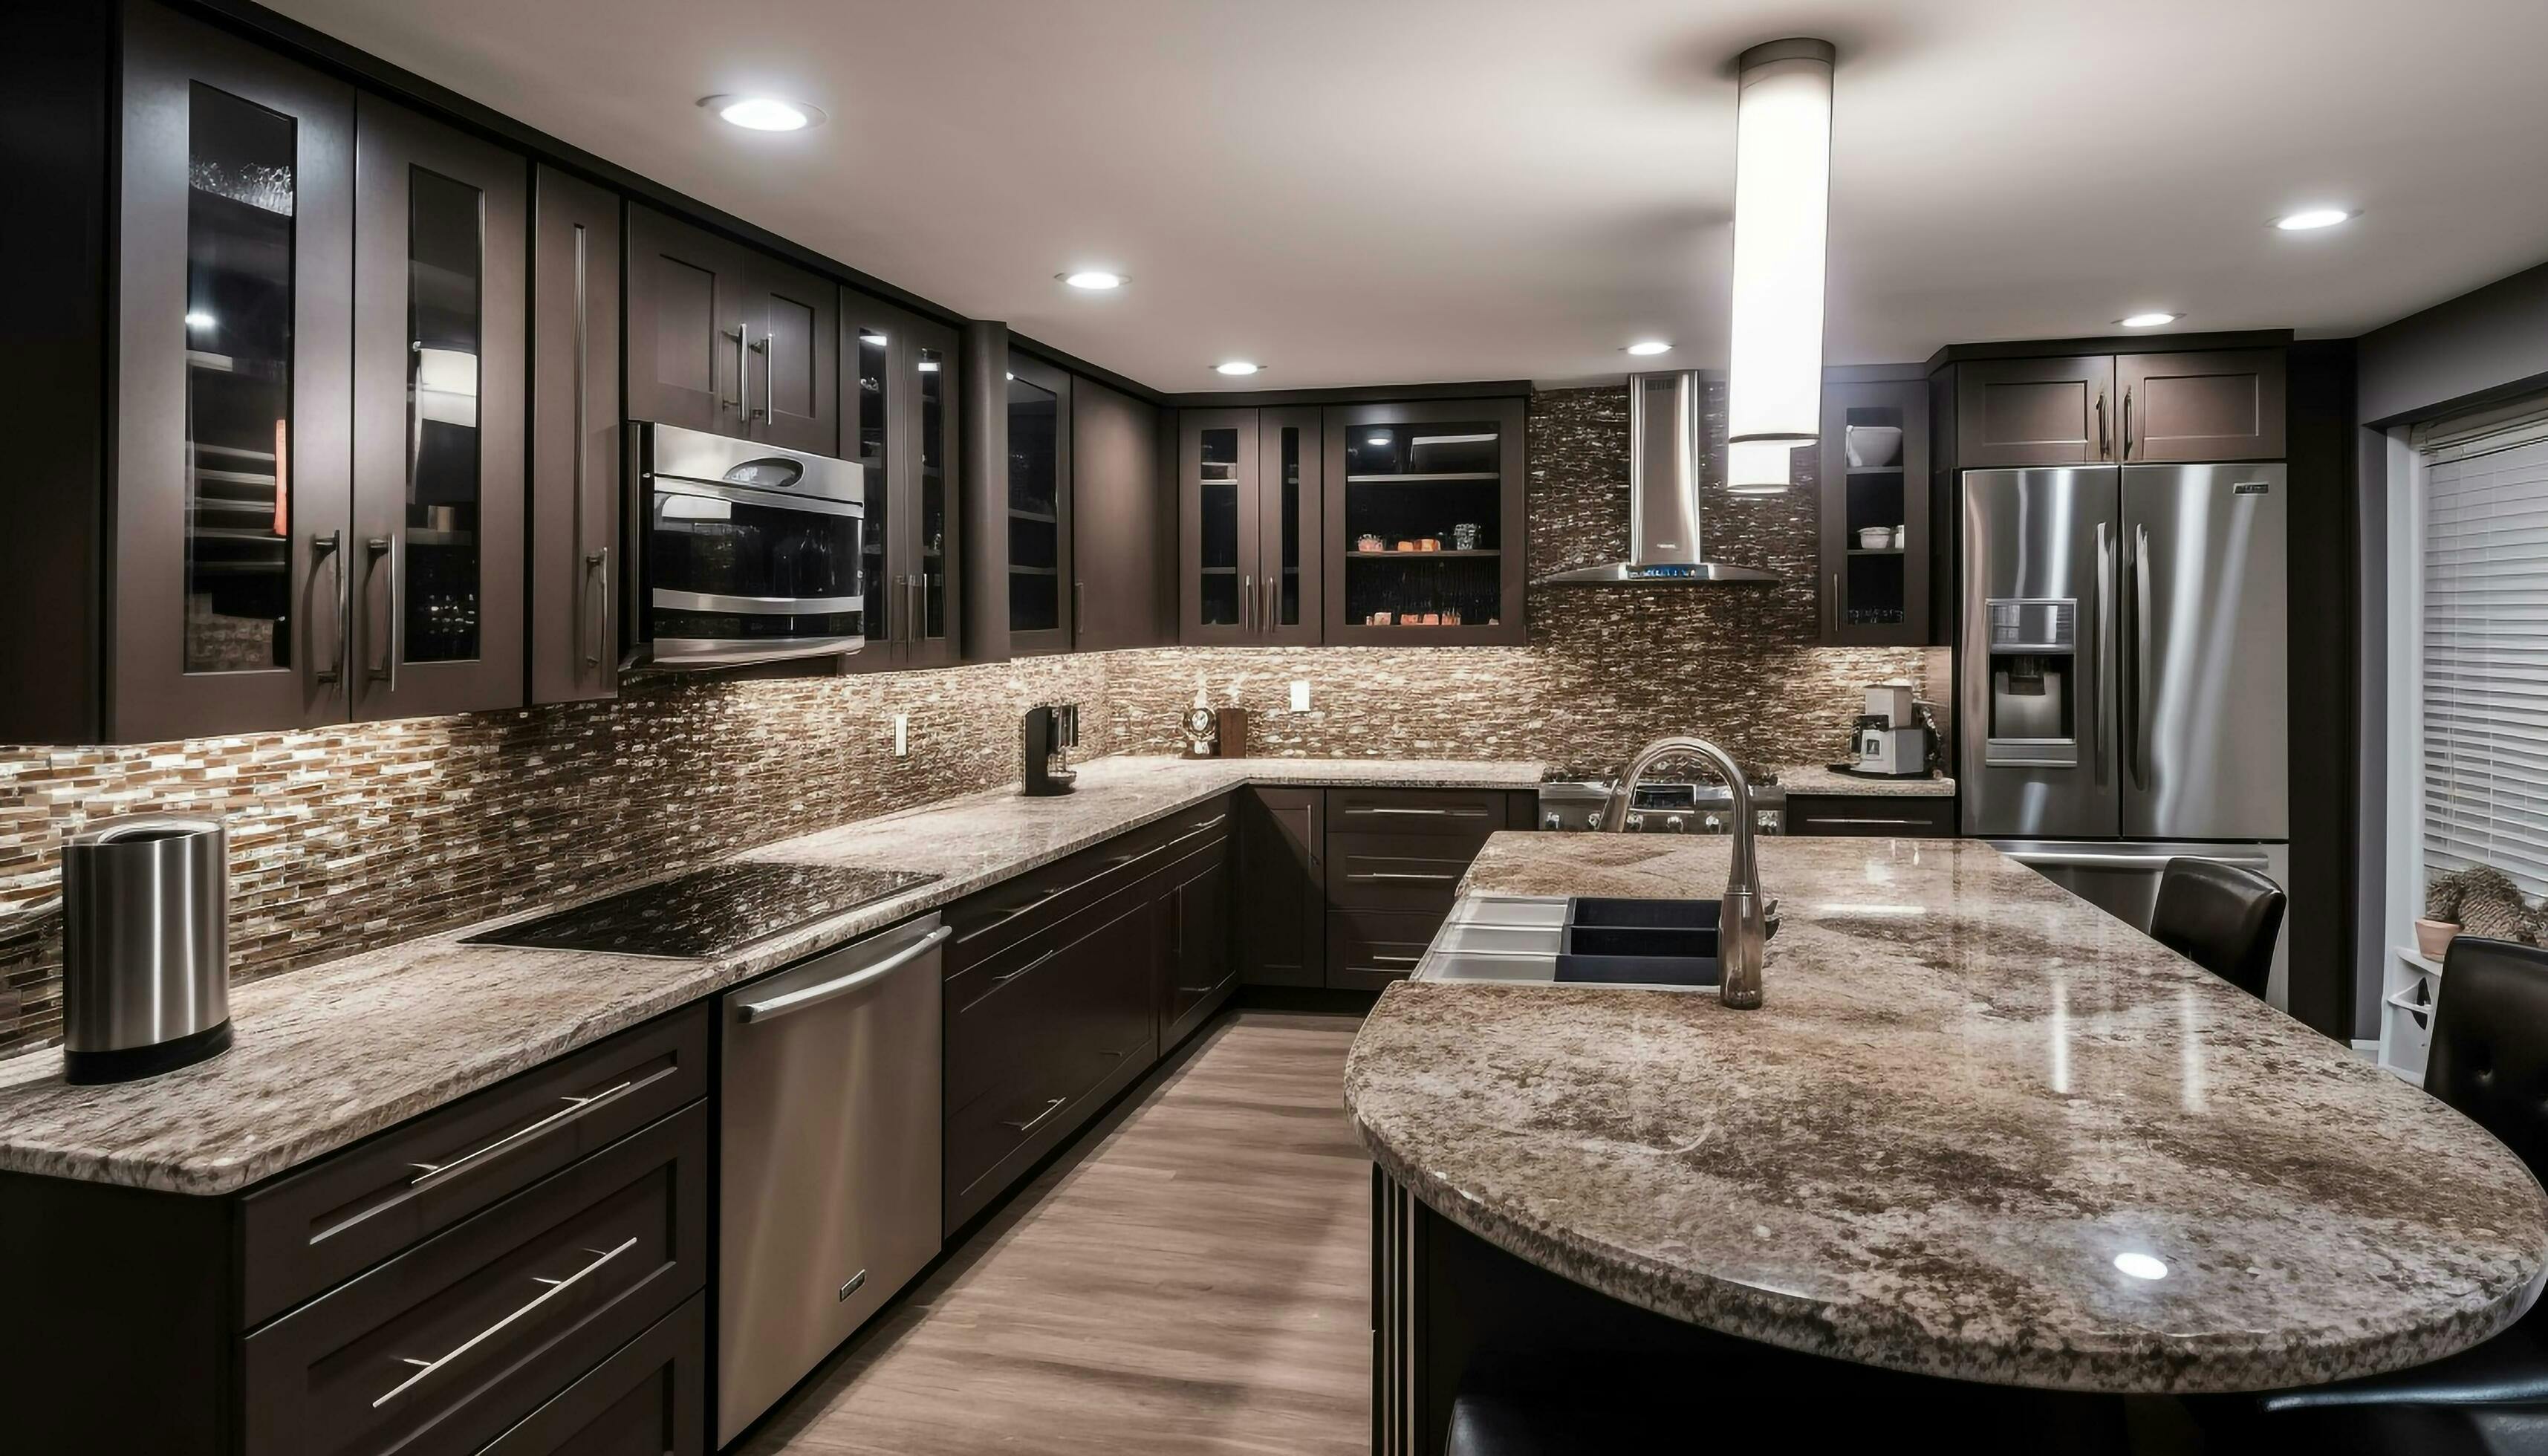 Remodeled kitchen with gray granite countertops and brown wooden cabinets